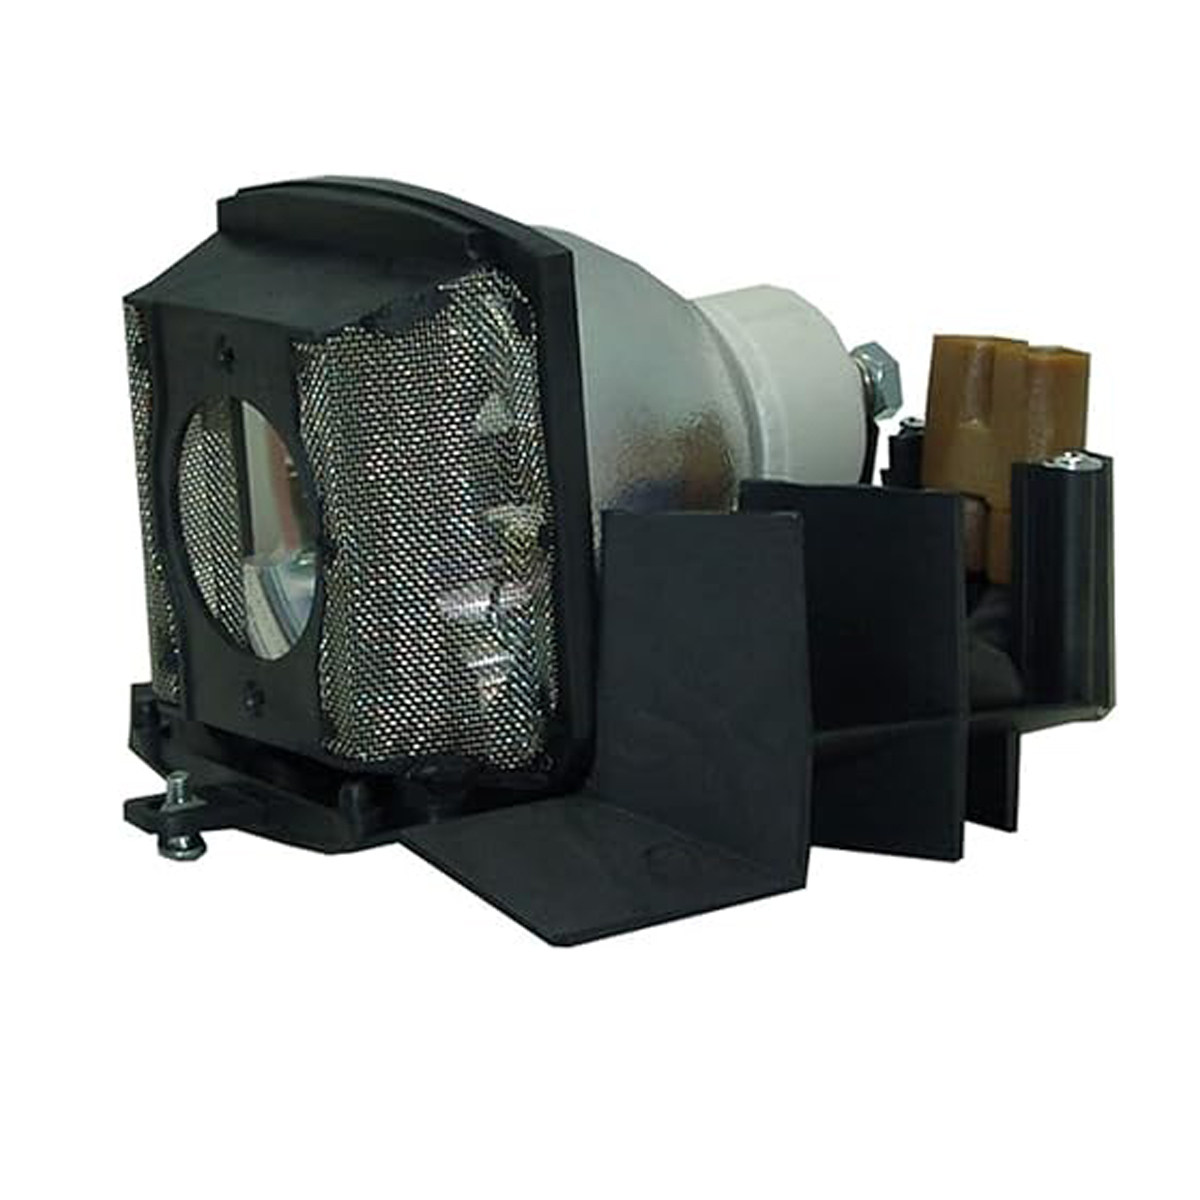 Replacement Projector lamp U5-201/28-030 For PLUS U5-201